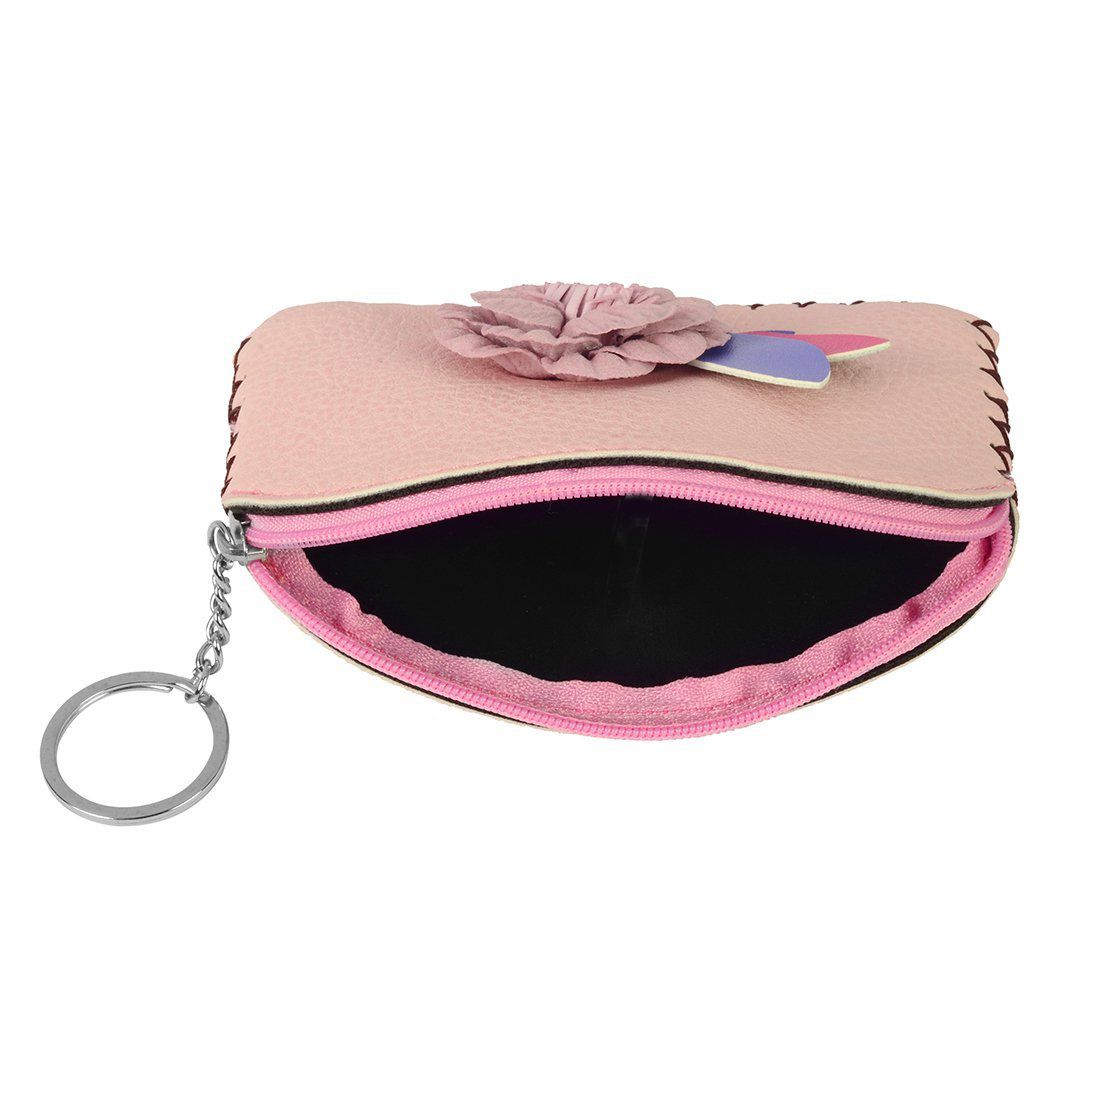 Buy Stripes Pink Coin Bags - 1 Pc at Best Prices in India - Snapdeal